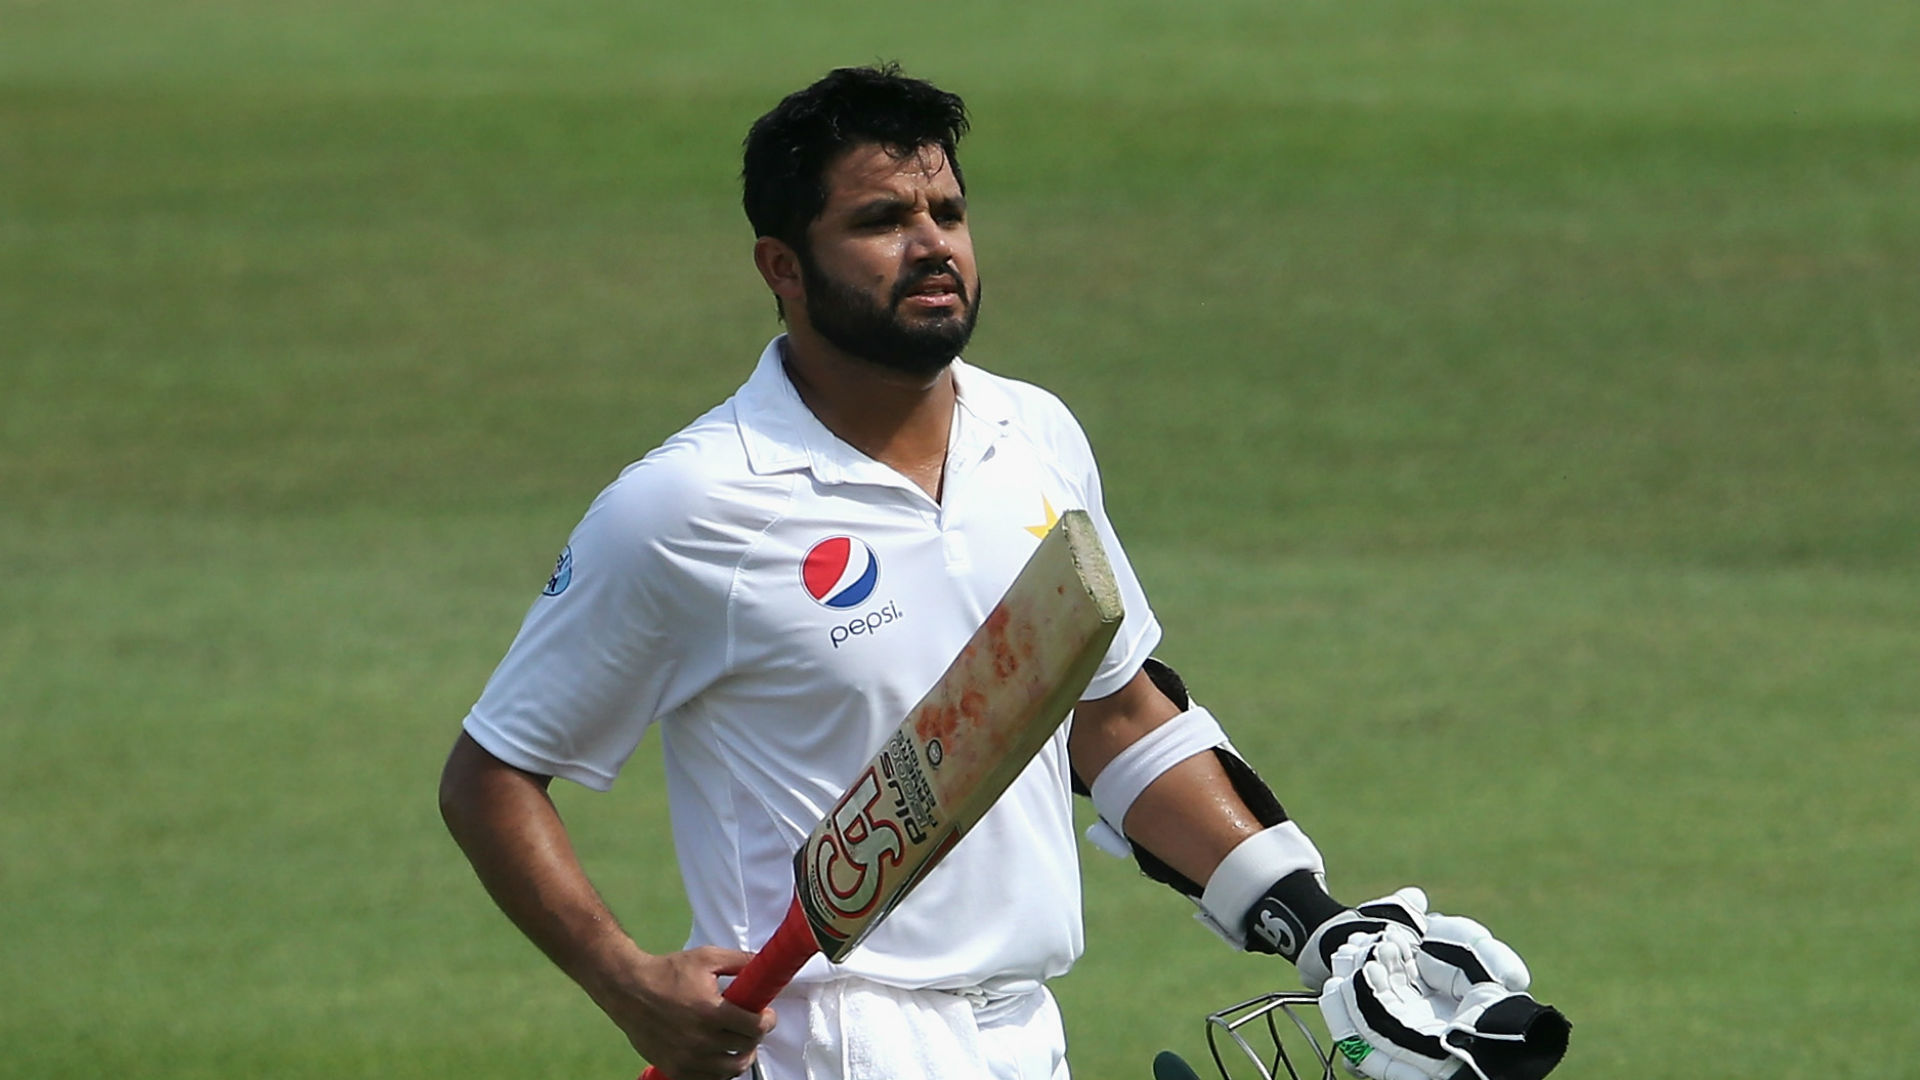 Pakistan enjoyed a successful third day in the second Test against Australia but only after Azhar Ali was remarkably run out.